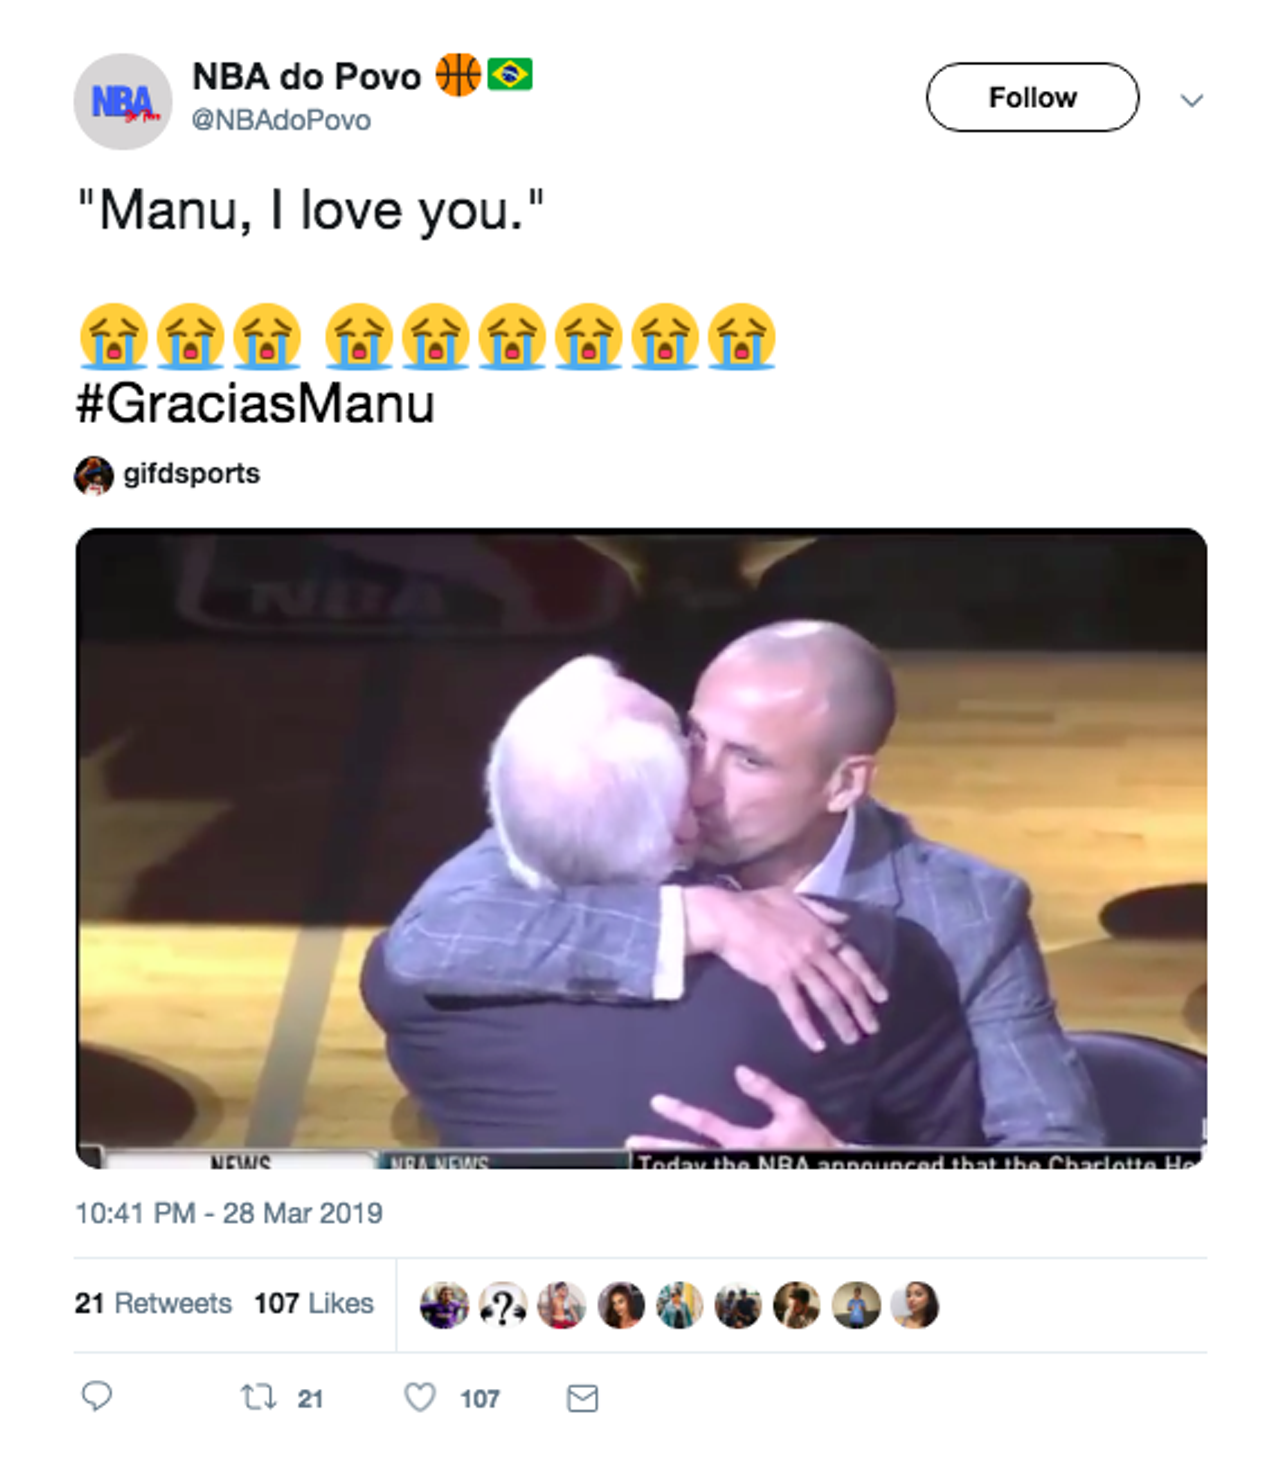 Coach Pop ended his speech with "Manu, I love you" and then they had this nice moment
Source